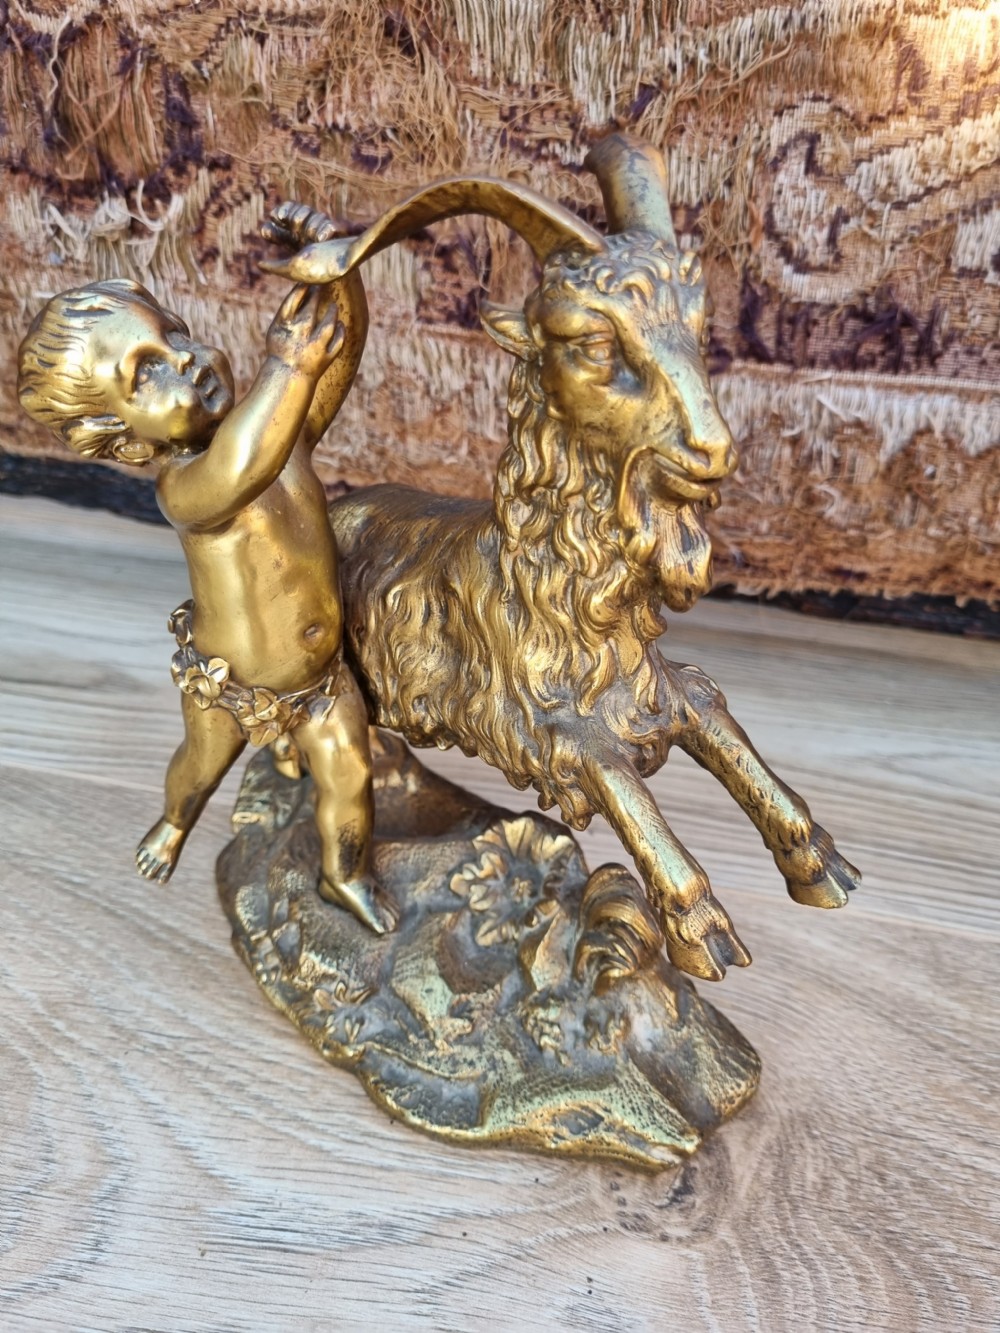 quality 19thc gilt bronze of a cherub playing with a goat